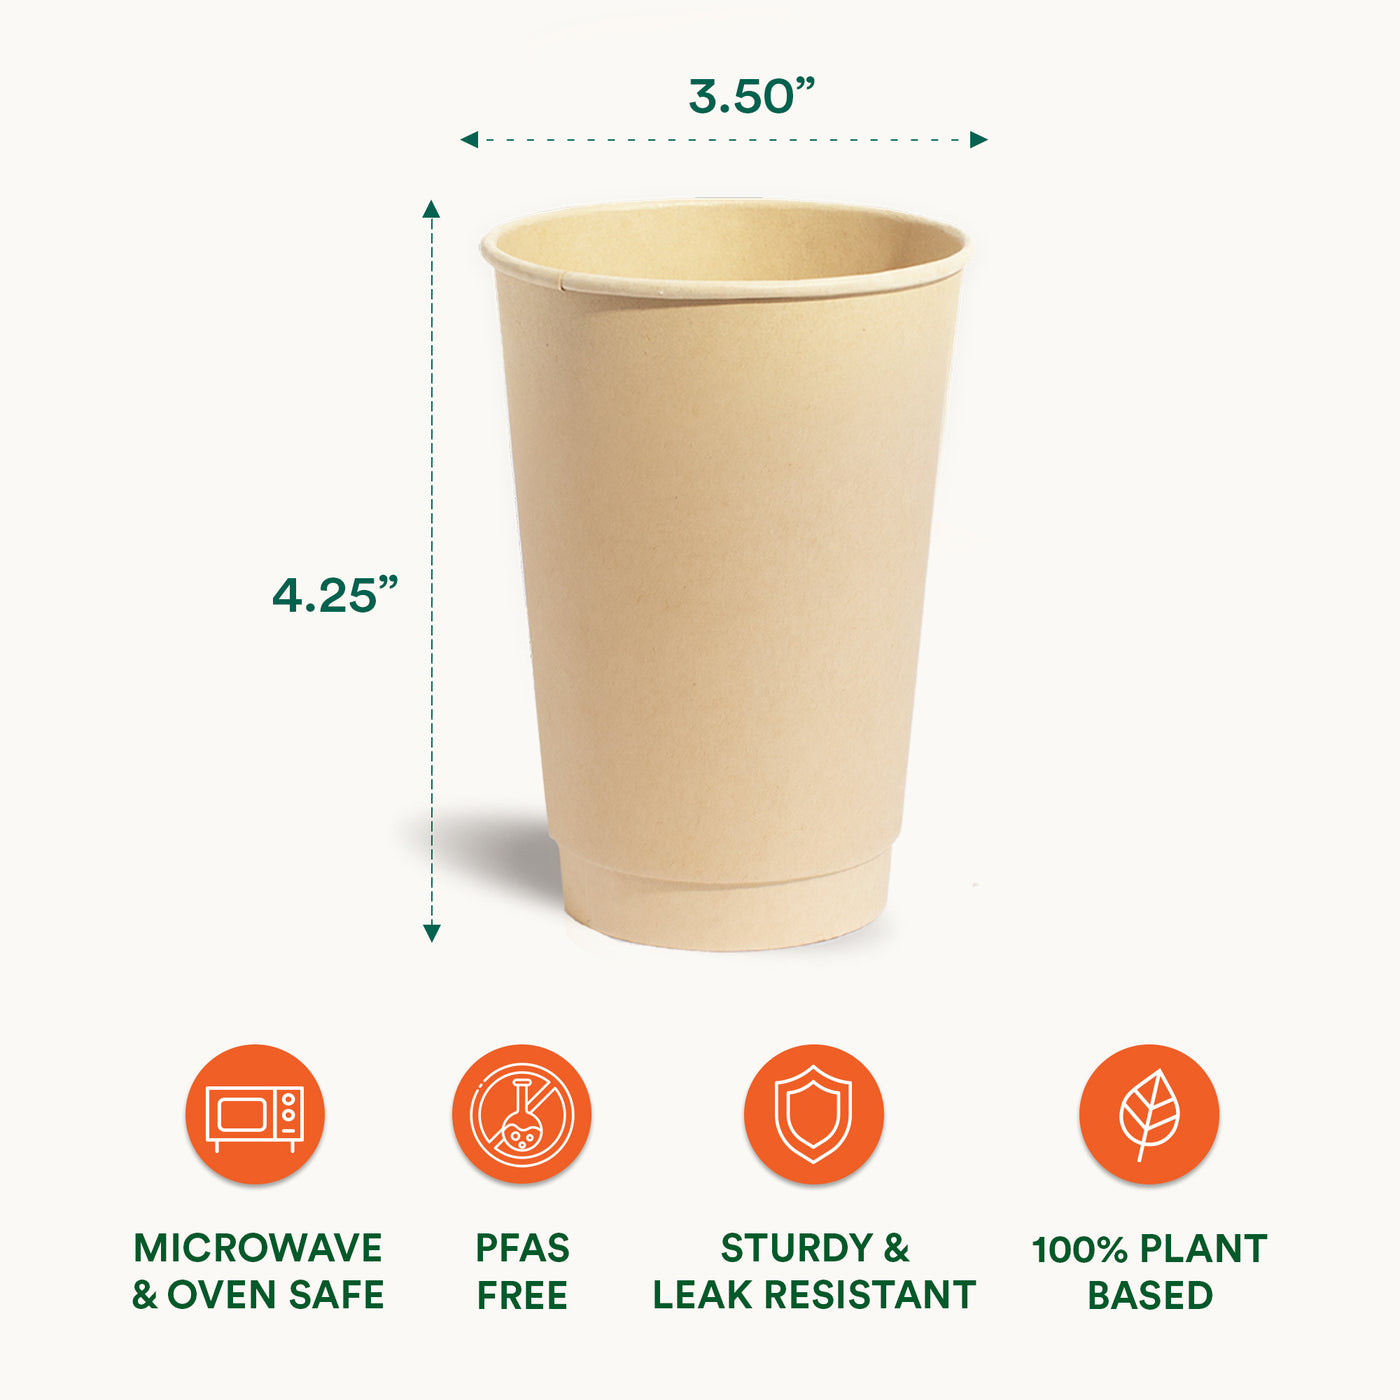 A 16oz compostable hot cup with measurements and features, showcasing its capacity and eco-friendly attributes.